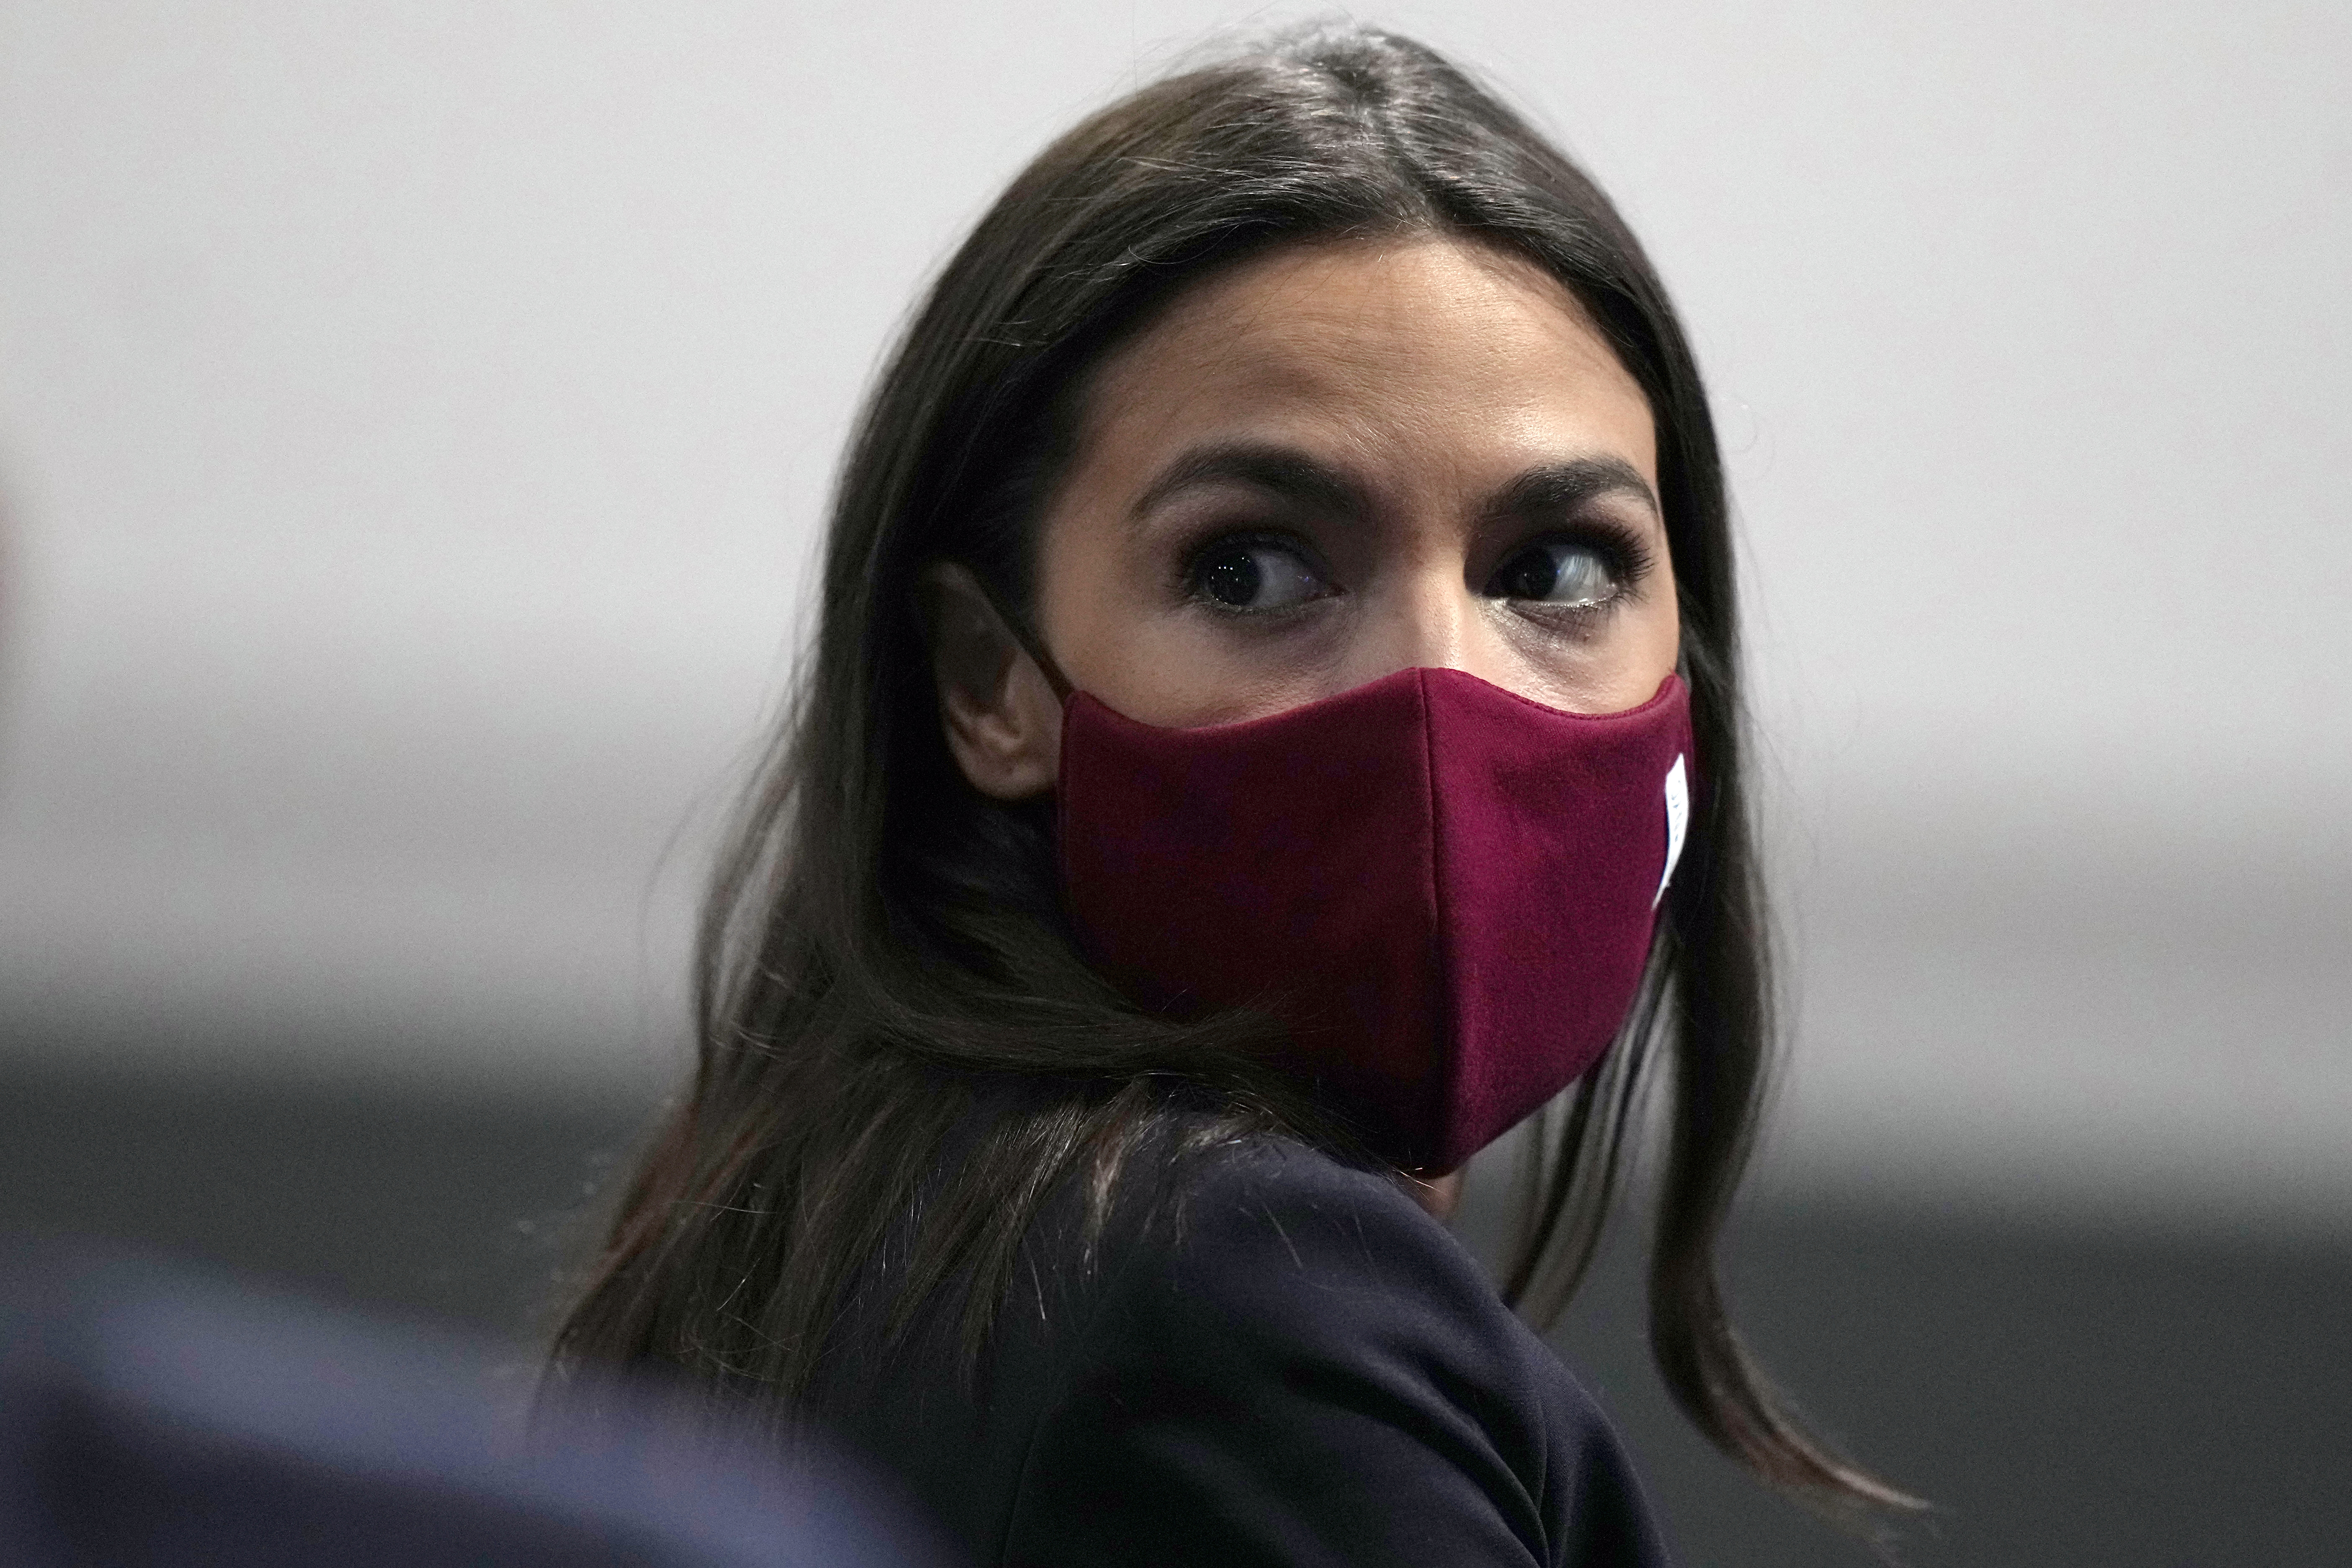 NY Rep. Ocasio-Cortez recovering after positive COVID test